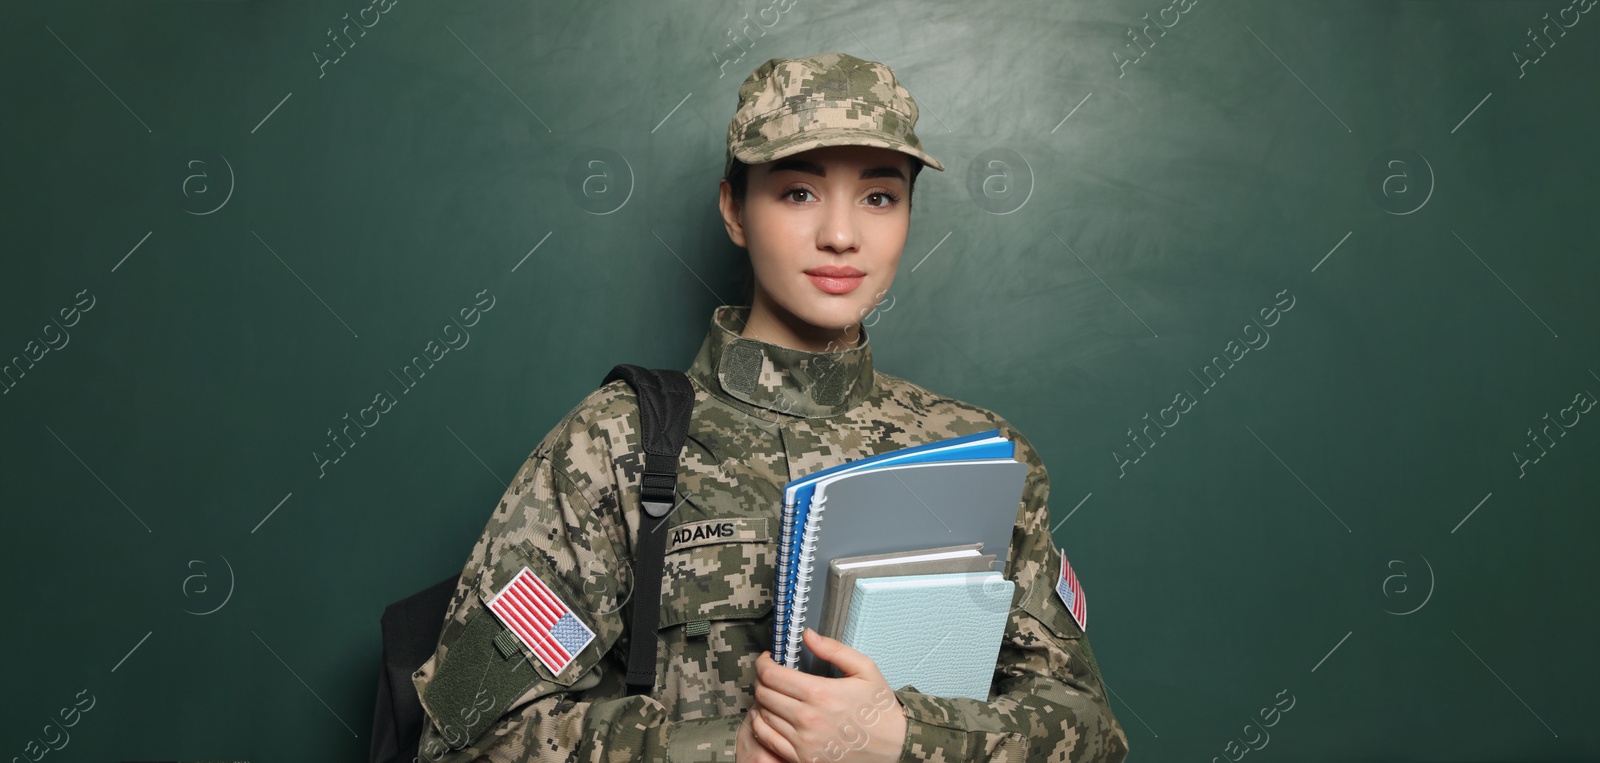 Image of Military education. Cadet with backpack and notebooks near green chalkboard